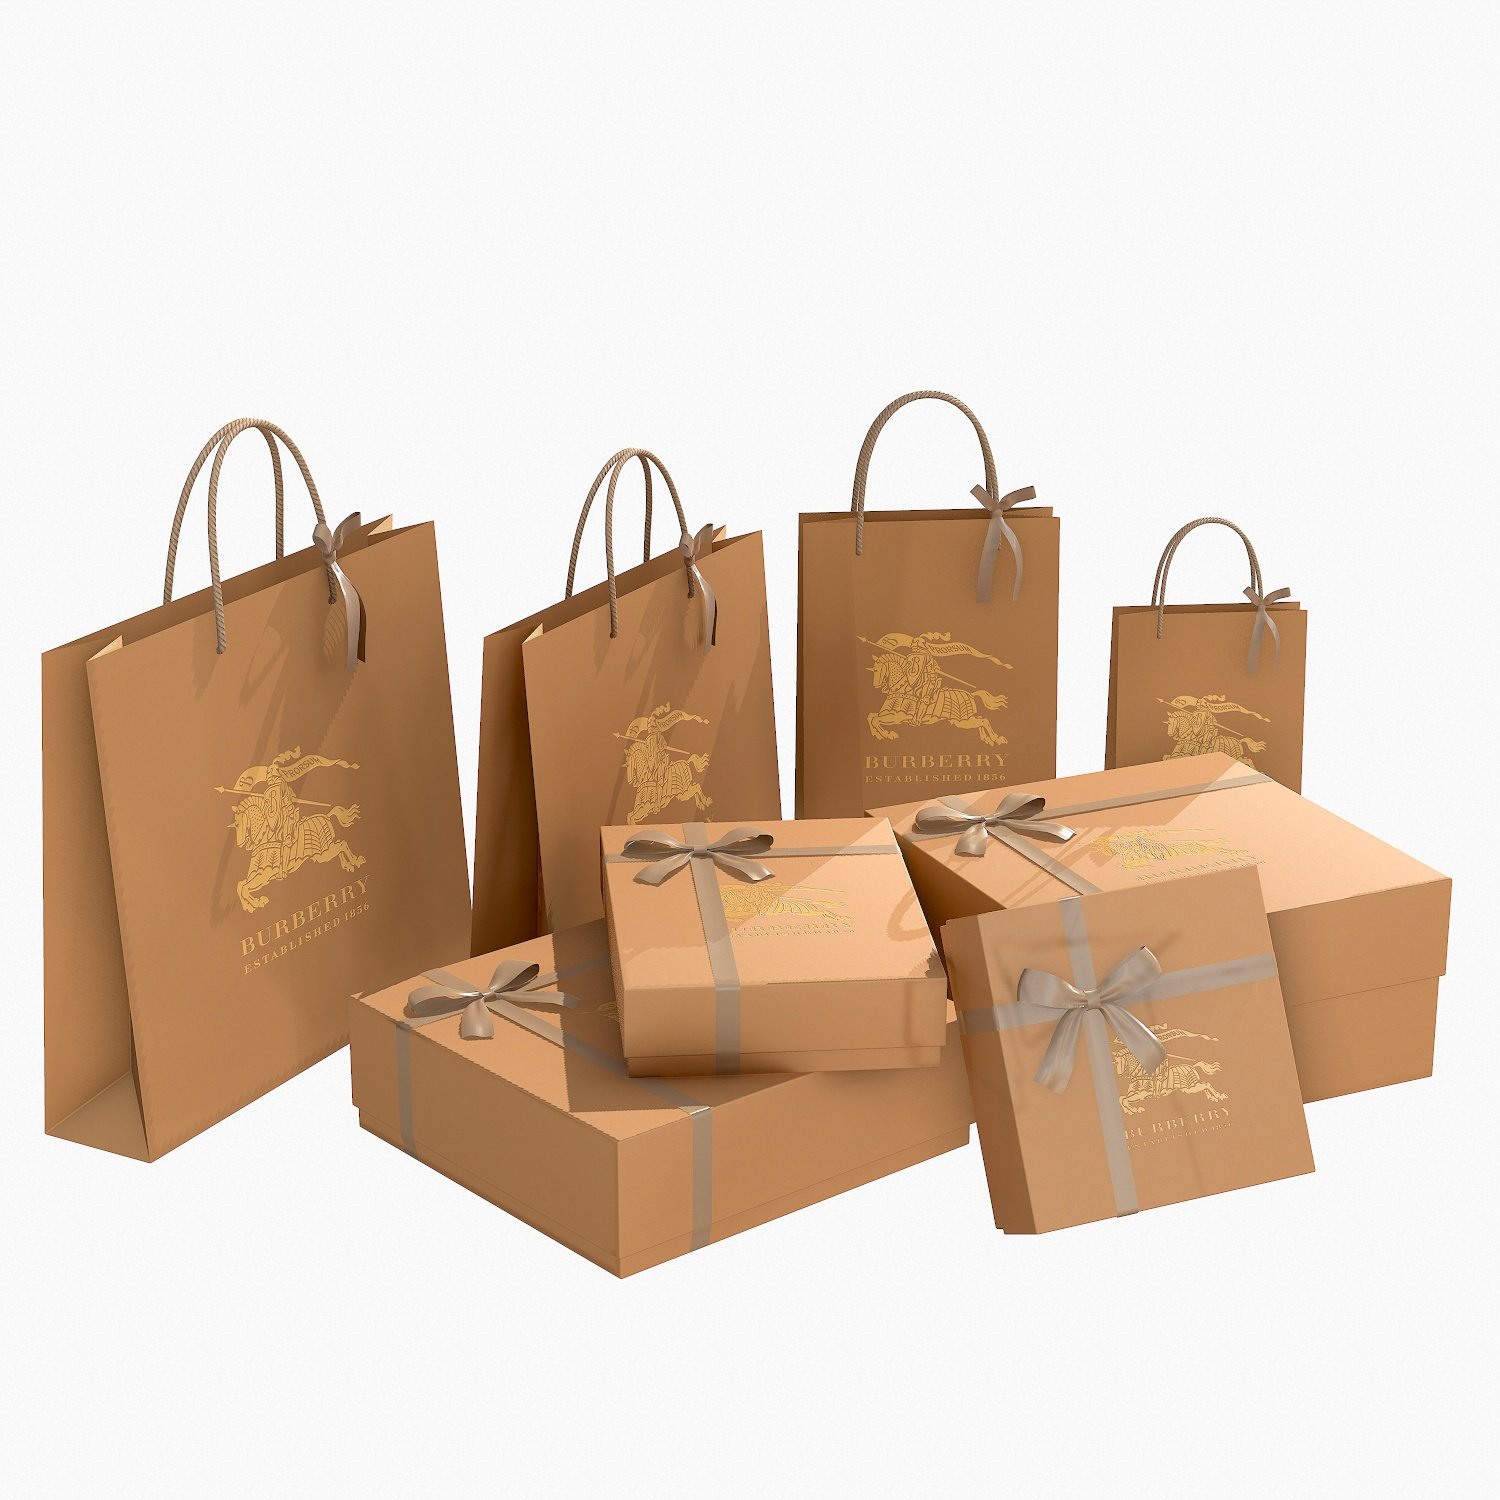 burberry gift packaging boxes and paper bags 3D Model in Other 3DExport